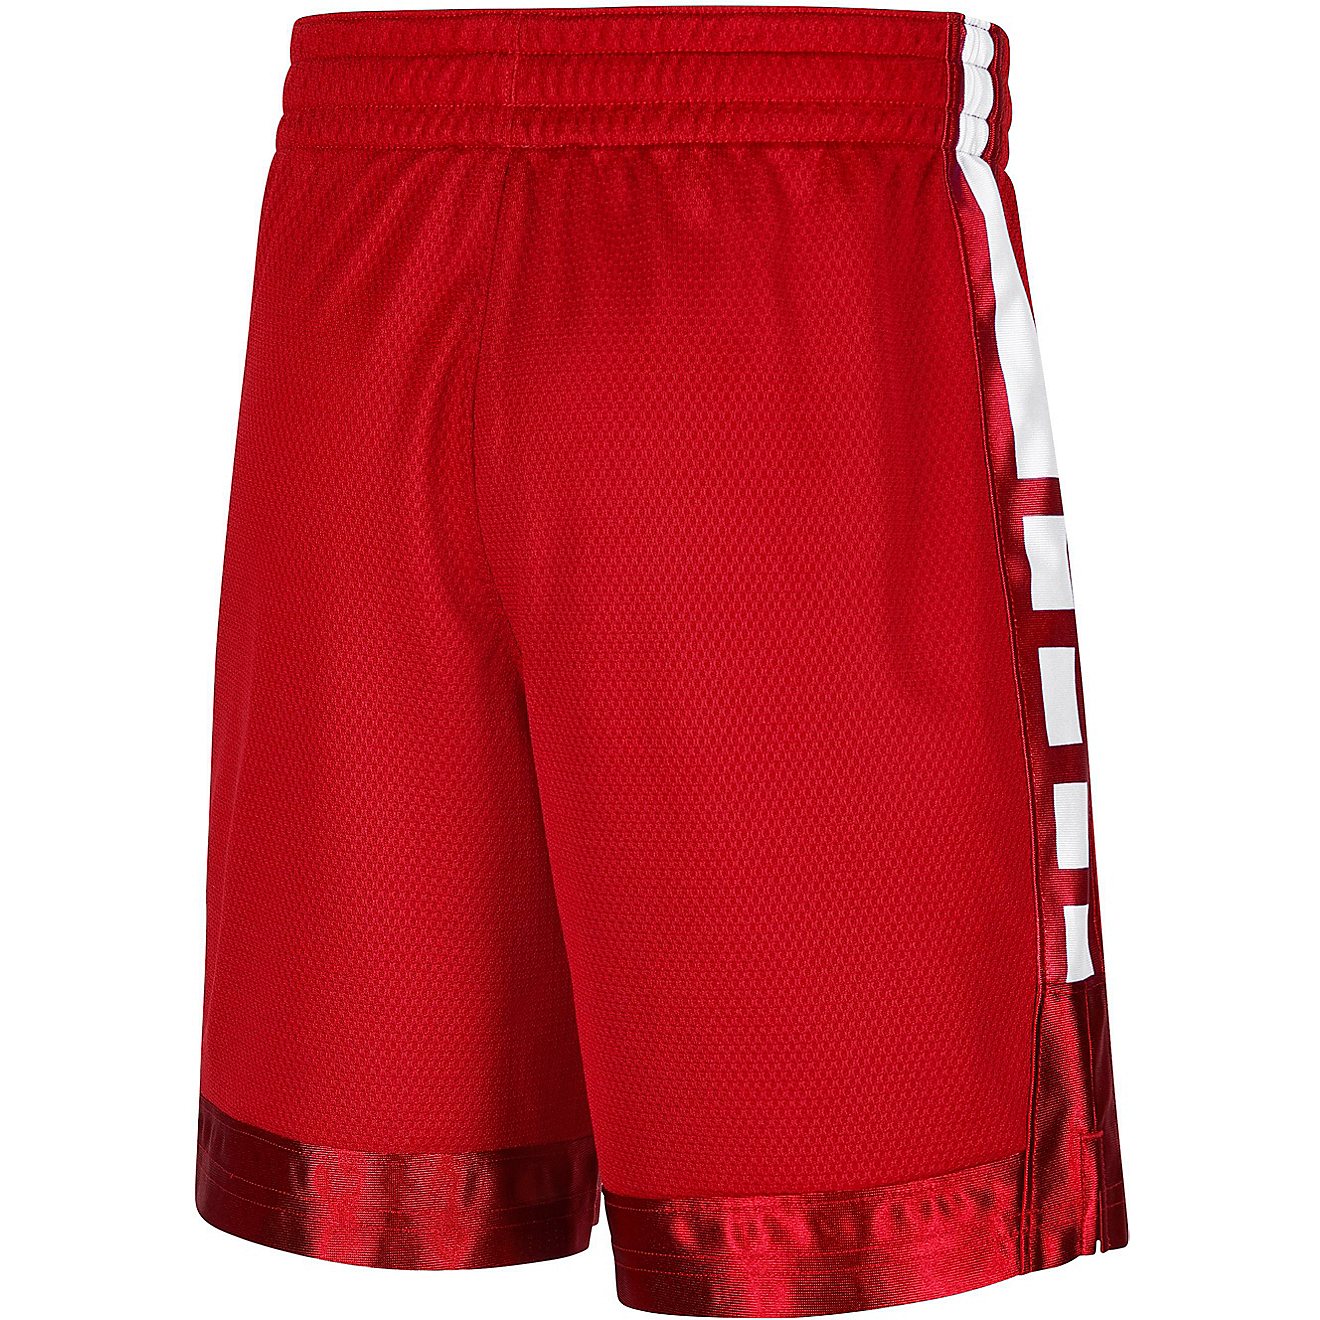 Nike Boys’ Dri-FIT Elite Stripe Basketball Extended Sizing Shorts                                                              - view number 6